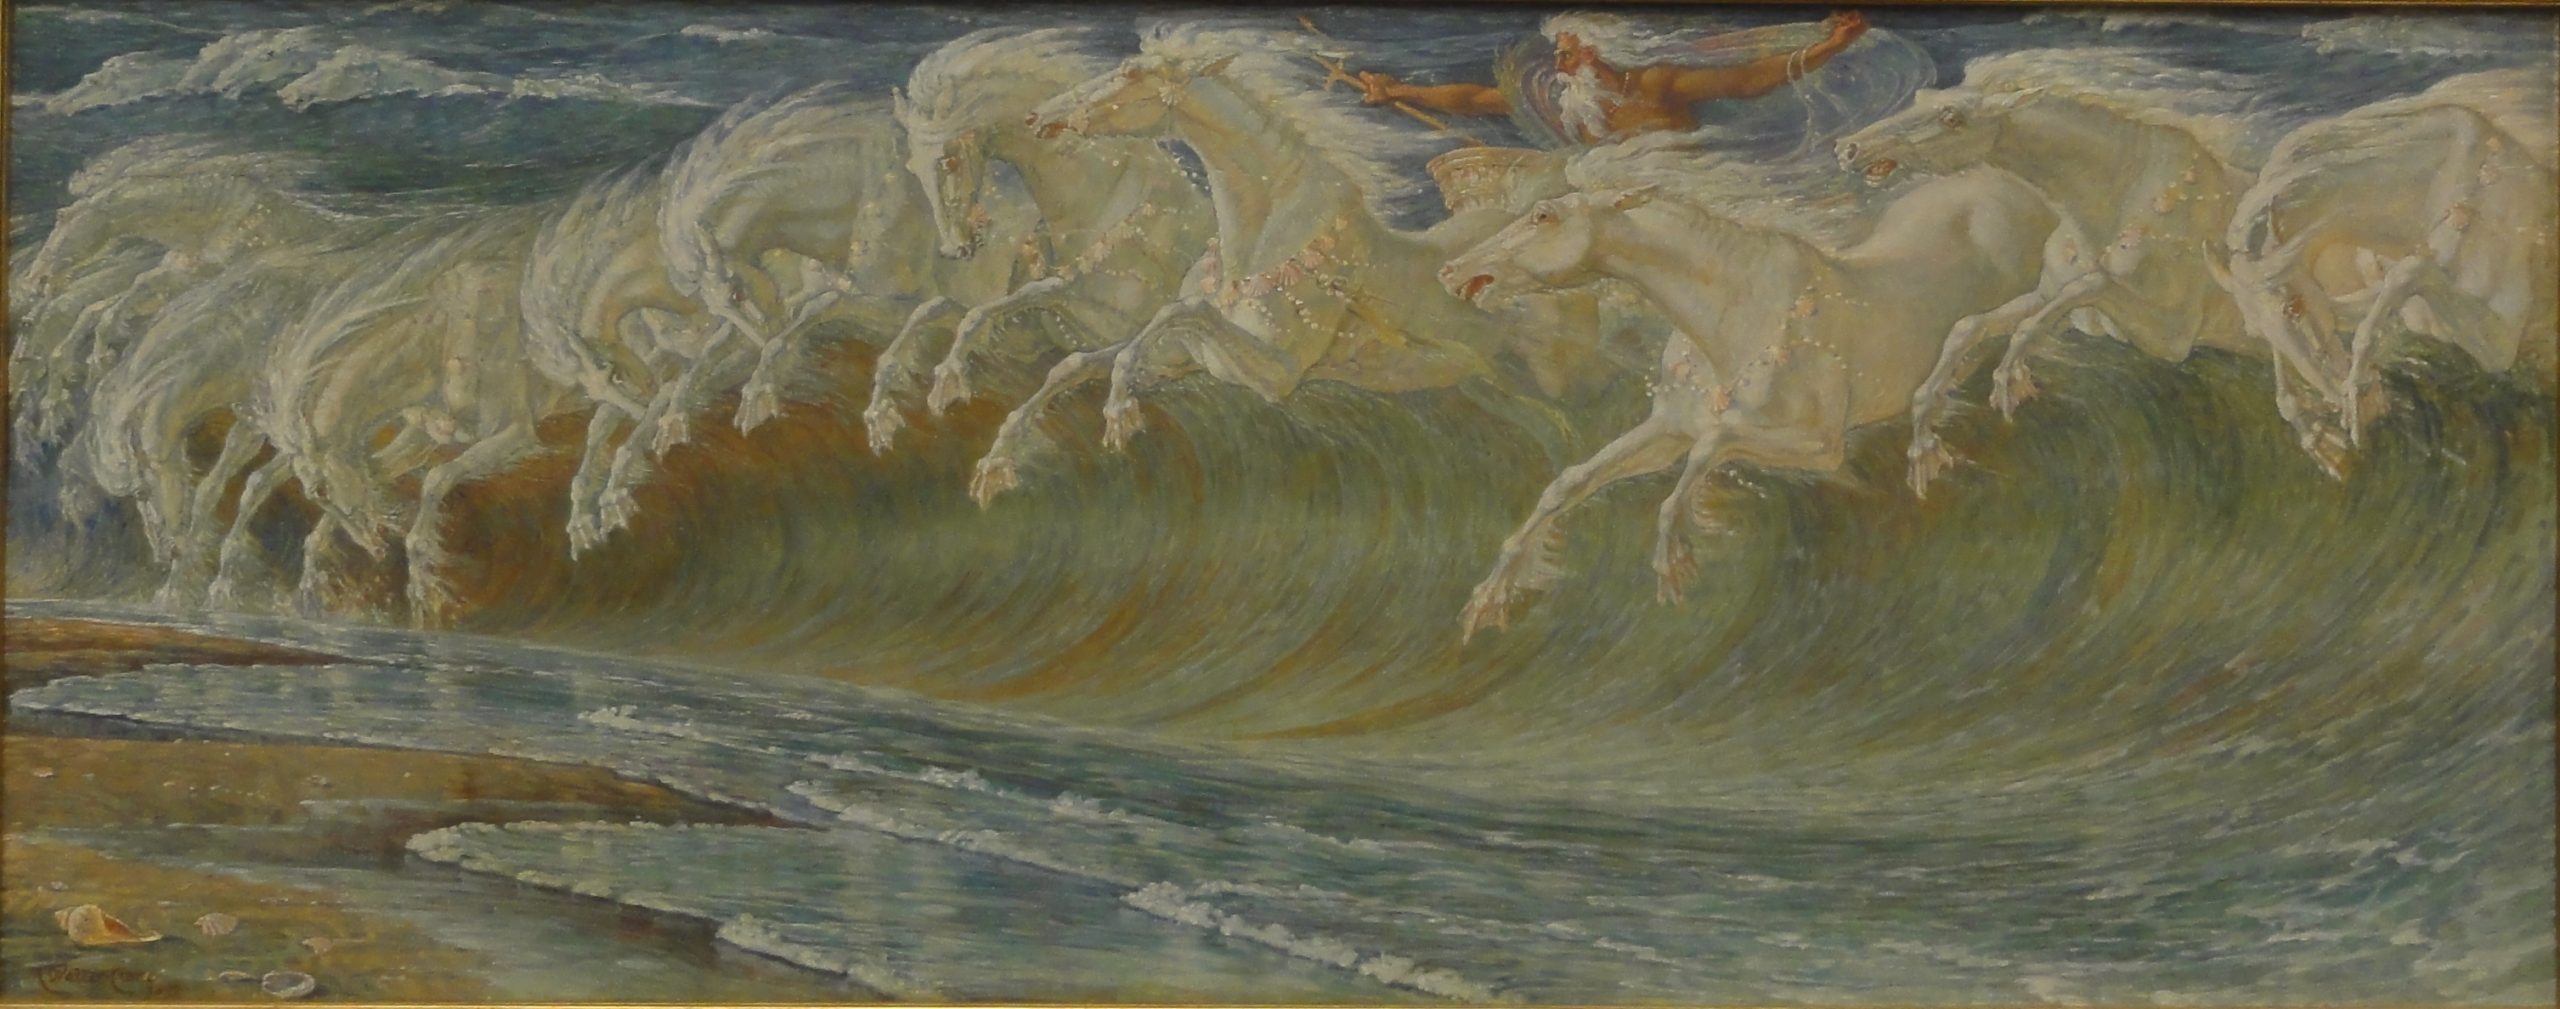 Horses galloping out of a wave